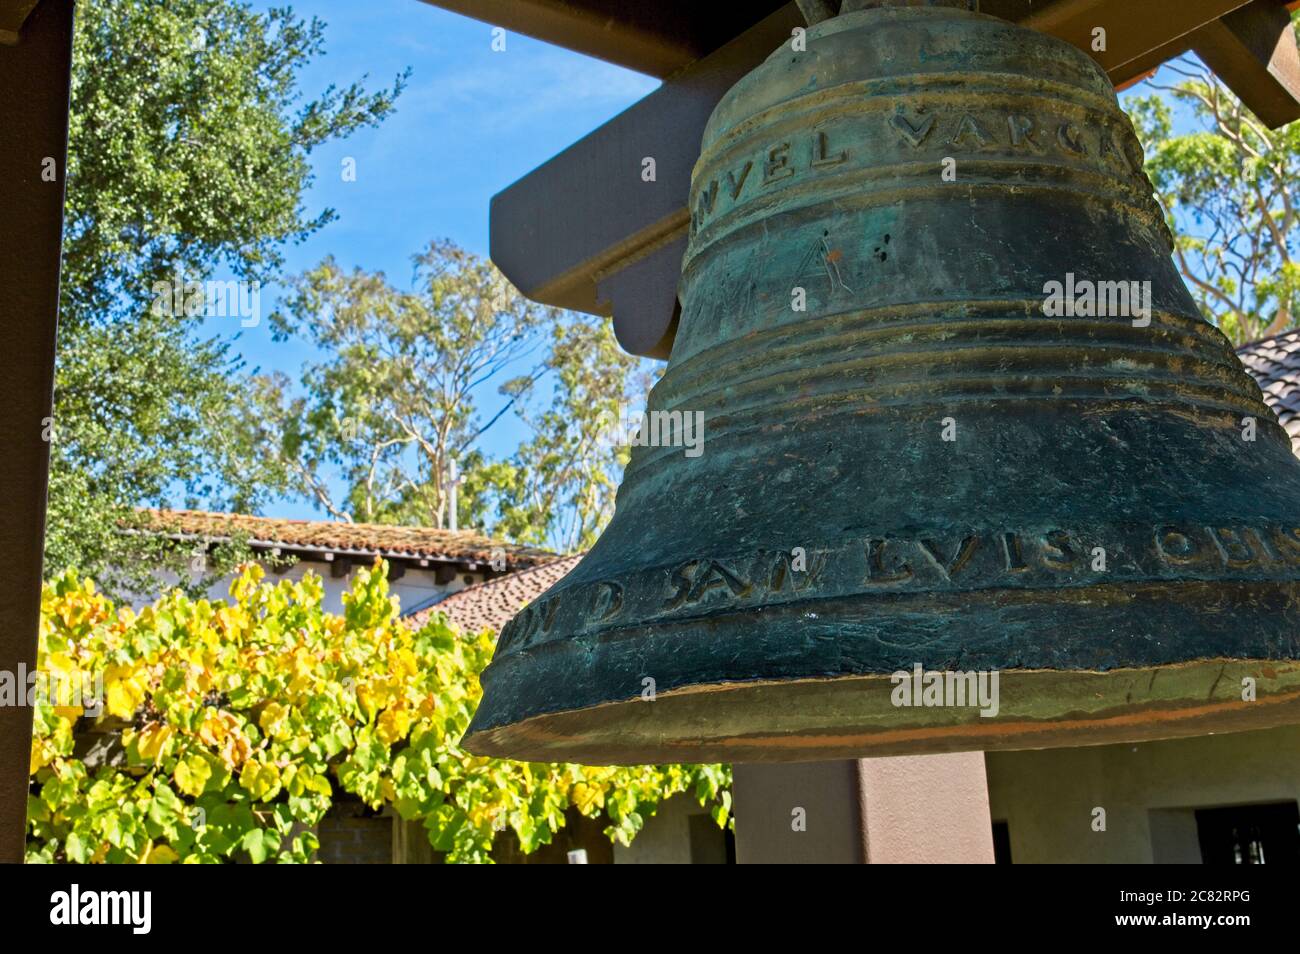 Mission San Luis Obispo, a Spanish mission founded in 1772 by Father Junípero Serra. California. Stock Photo